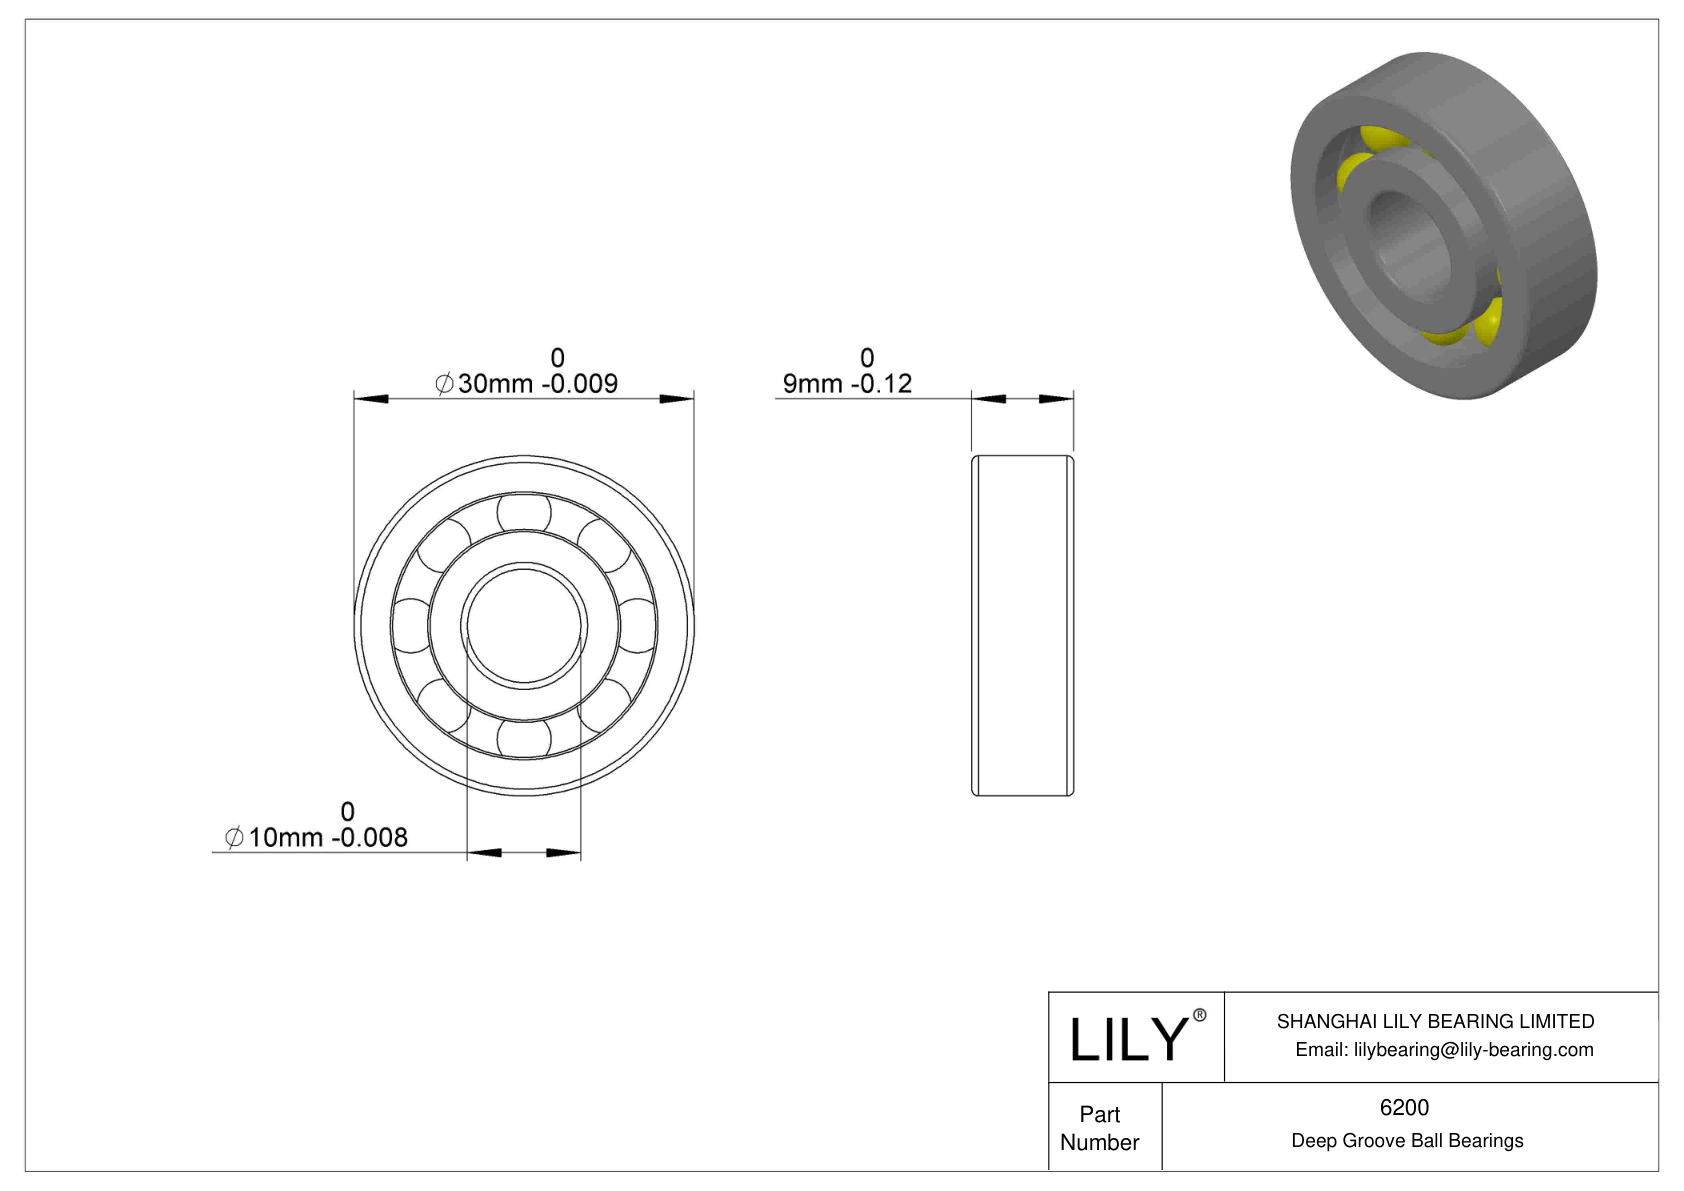 LILY-PU620040-12C2L12M8 Polyurethane Coated Bearing With Screw cad drawing